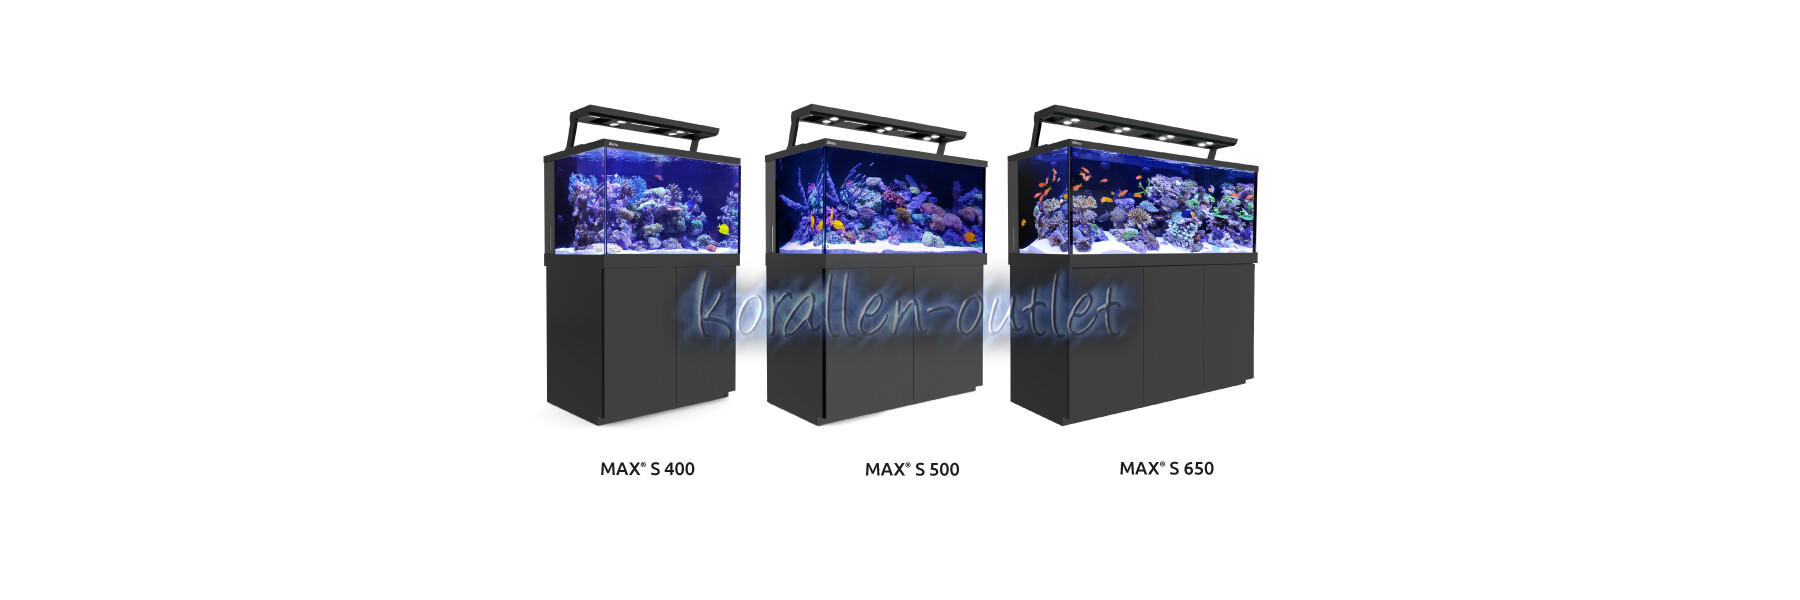 MAX® S-LED Serie (mit ReefLED 90 Beleuchtung)